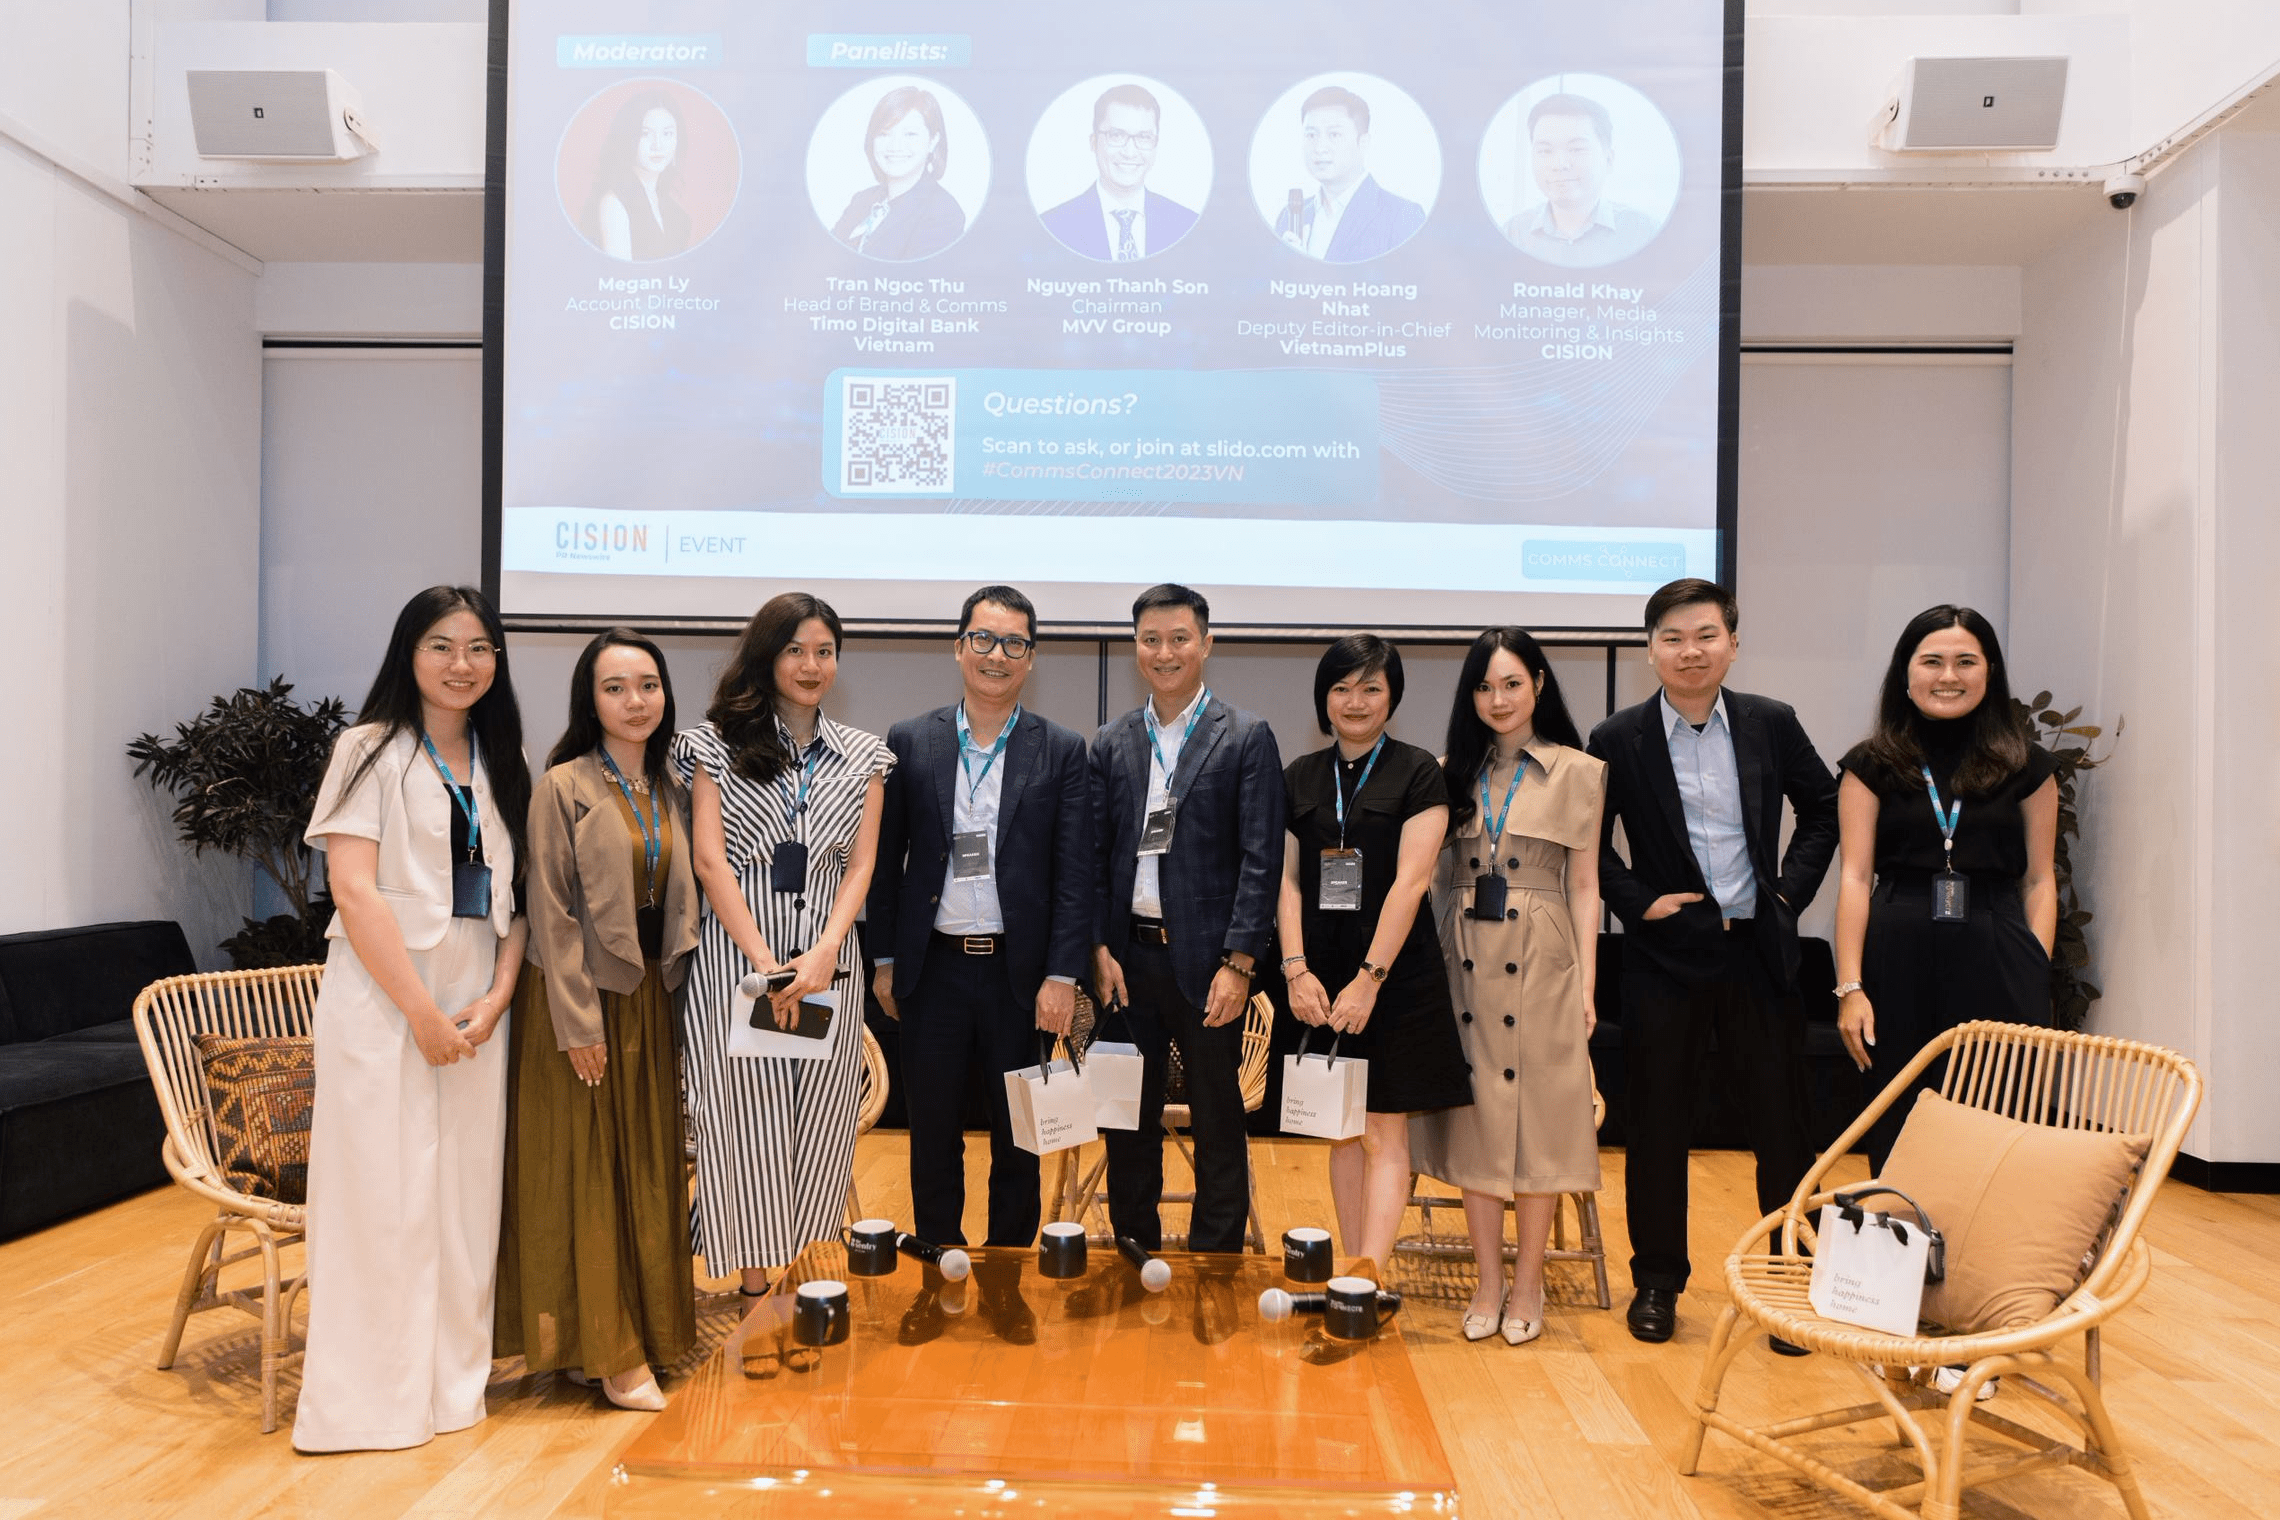 Data-Driven Strategies and Inspiring Stories for a Successful Campaign – Key takeaways from the Comms Connect Event in Vietnam